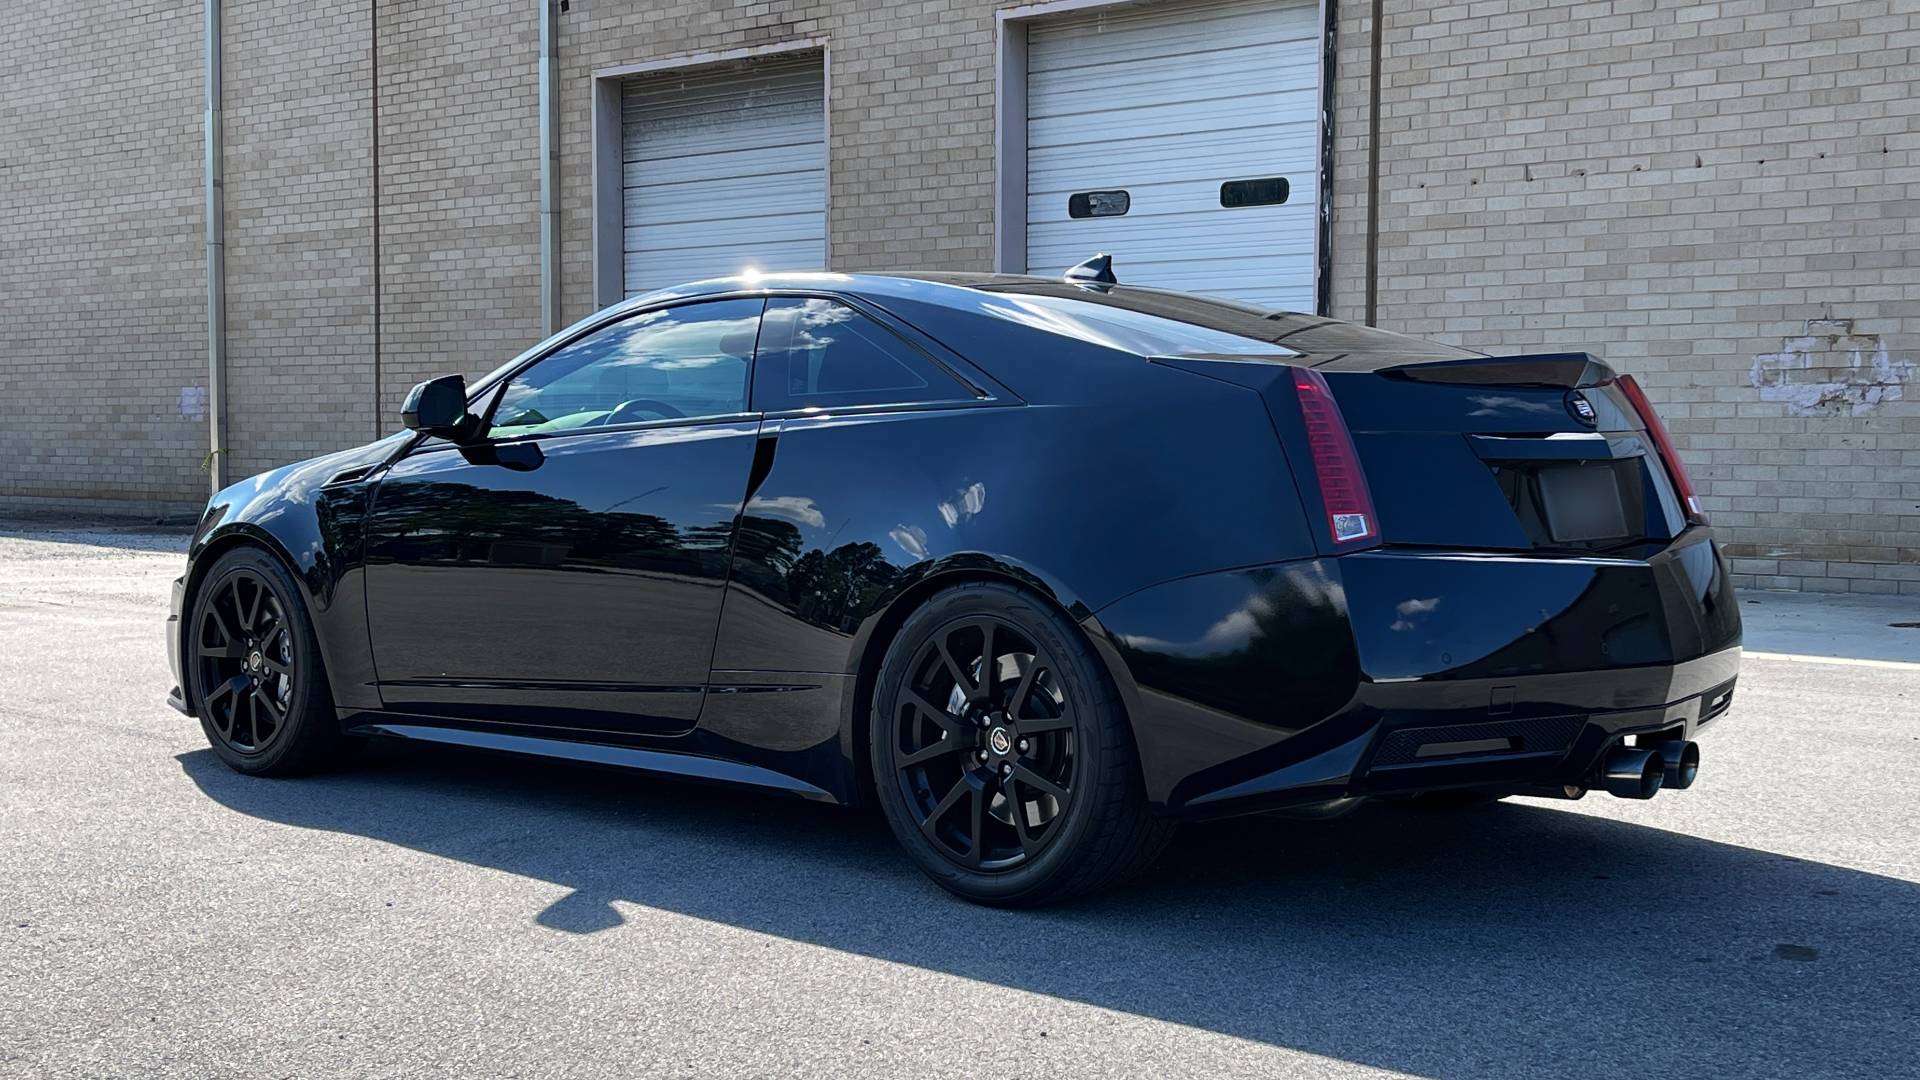 Used 2011 Cadillac CTS-V COUPE 6.2L 600HP+ / NAV / BOSE / SUNROOF / RECARO / 19IN WHLS / REARVIEW for sale $39,995 at Formula Imports in Charlotte NC 28227 5